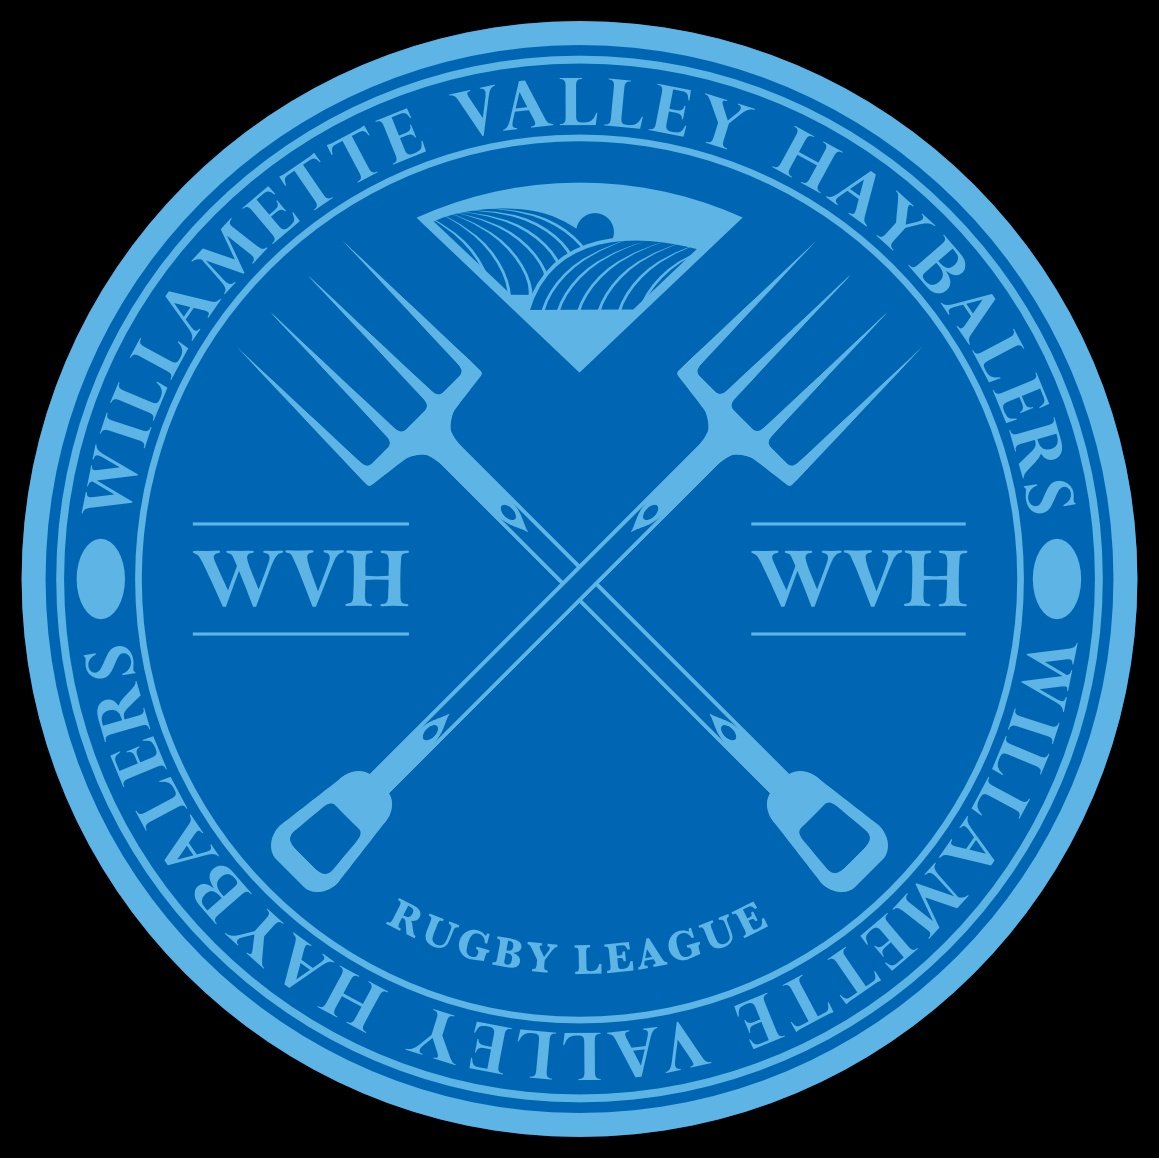 for the month of April, our logo will be blue to represent all those on the #autismspectrum & bring awareness for #AutismAcceptanceMonth 
Please visit @AutismSocietyOR
or any other @AutismSociety chapters in your area & see how you can donate and help
#rugbyforall #AutismInRugby